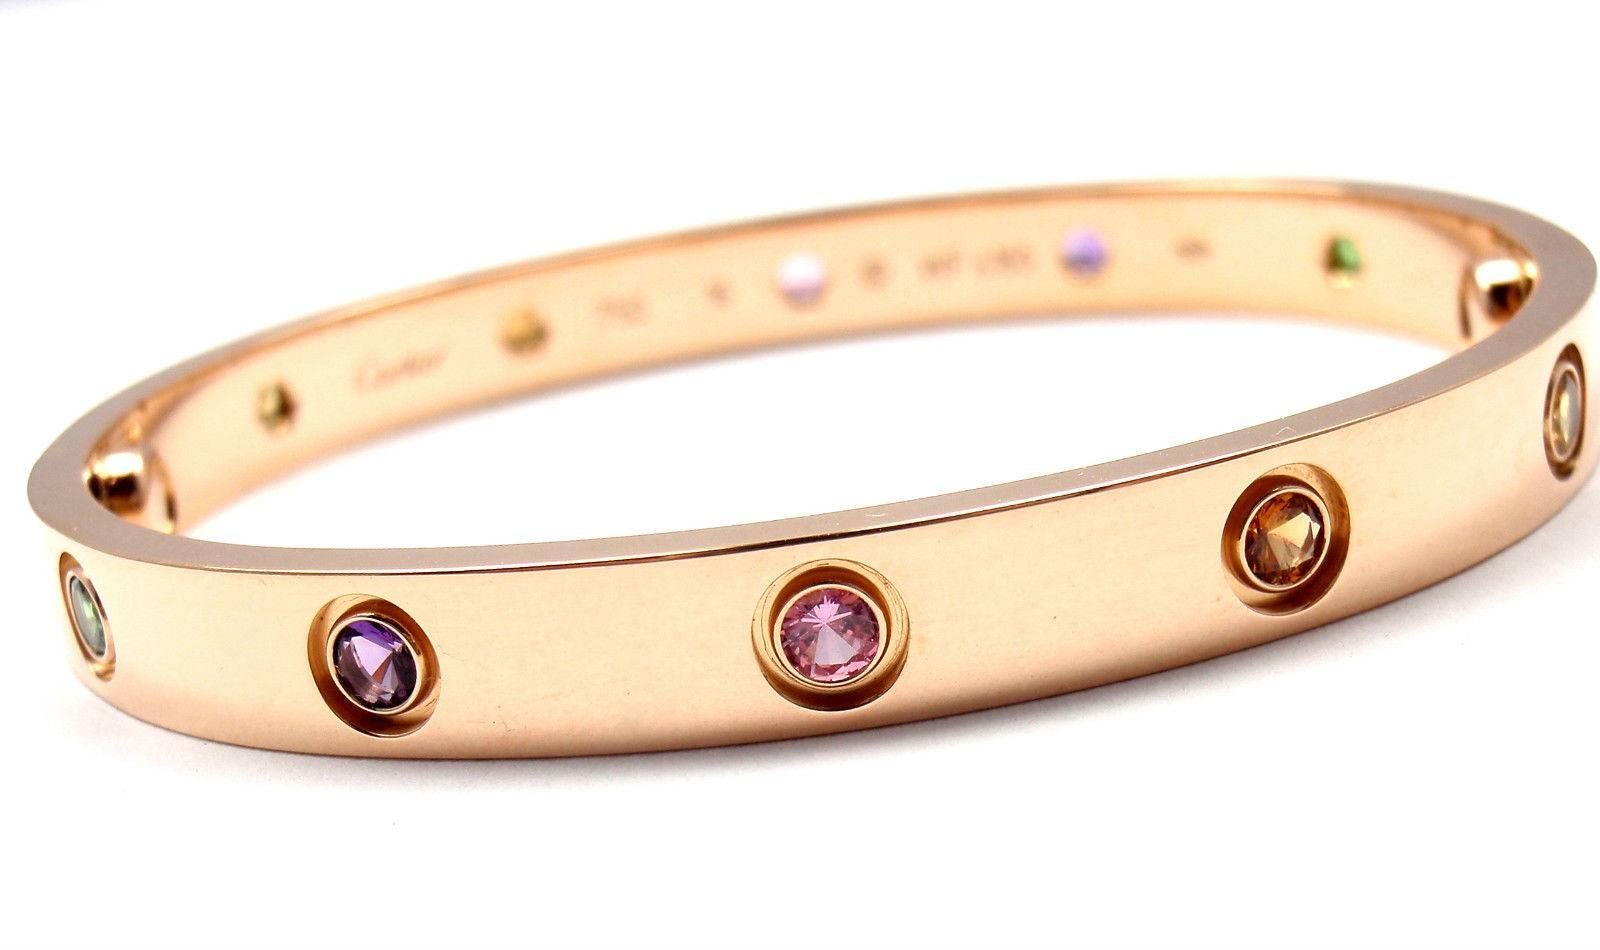 18k Rose Gold Color Stone LOVE Bangle Bracelet Size 16 by CARTIER. This beautiful bracelet comes with its original Cartier box and a screwdriver.
This bracelet has new screw system.
With 2 yellow sapphires, 2 pink sapphires,
2 green garnets, 2